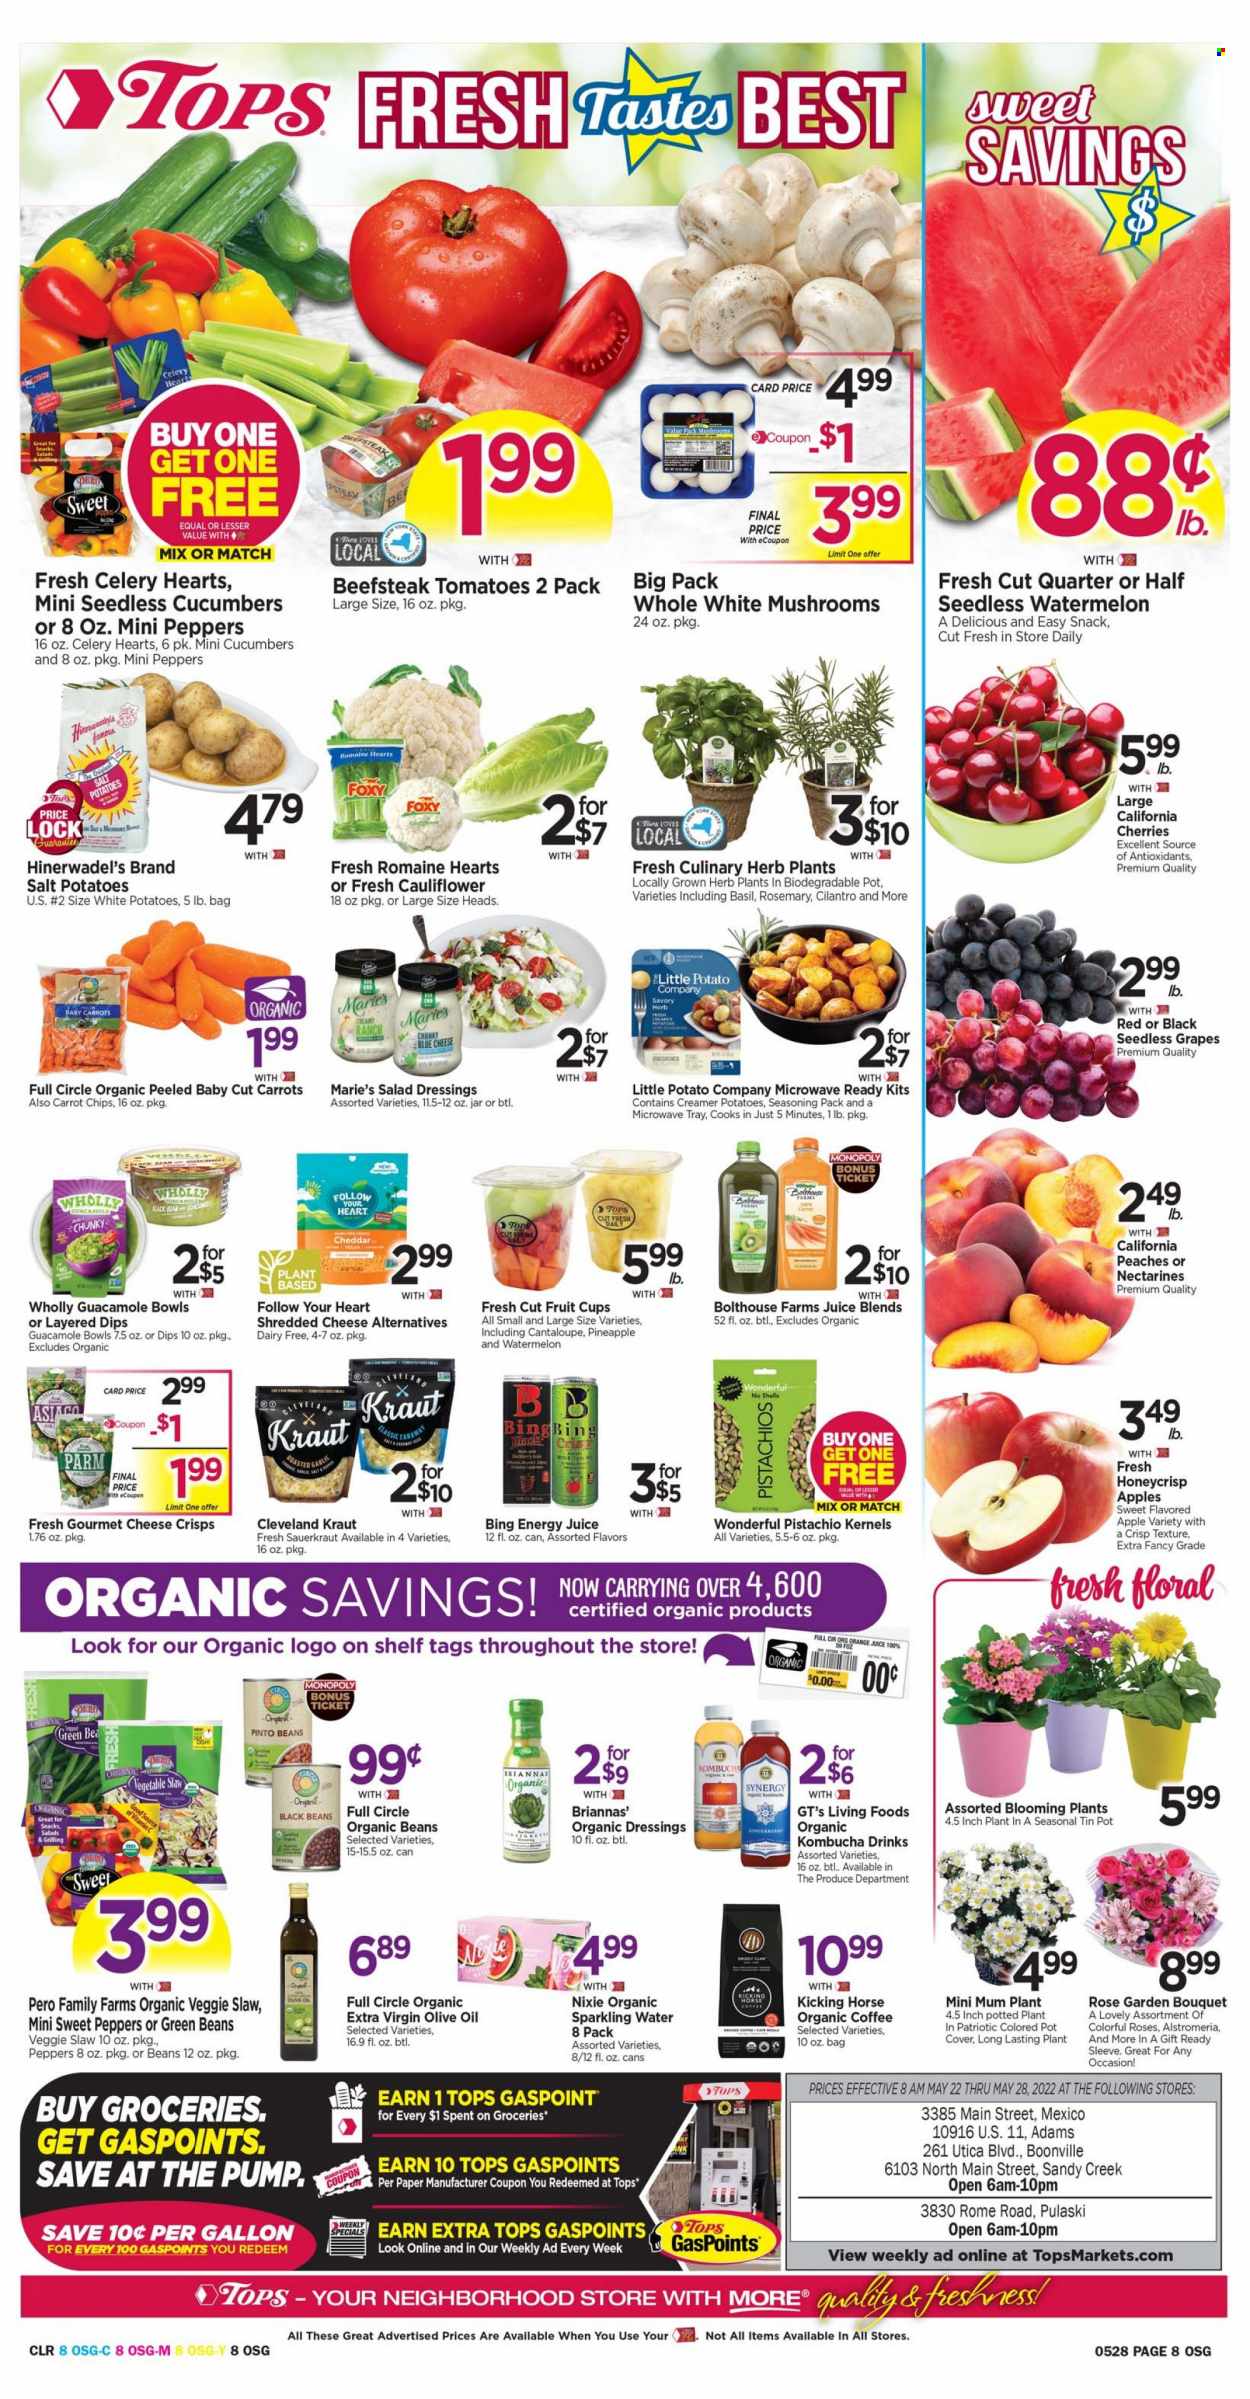 thumbnail - Tops Flyer - 05/22/2022 - 05/28/2022 - Sales products - mushrooms, carrots, celery, cucumber, green beans, sweet peppers, tomatoes, potatoes, peppers, sleeved celery, apples, grapes, seedless grapes, watermelon, pineapple, fruit cup, guacamole, shredded cheese, chips, salt, black beans, sauerkraut, pinto beans, esponja, cilantro, rosemary, spice, salad dressing, extra virgin olive oil, olive oil, oil, pistachios, orange juice, juice, sparkling water, kombucha, organic coffee, wine, rosé wine, pot, bouquet, rose, nectarines, peaches. Page 8.